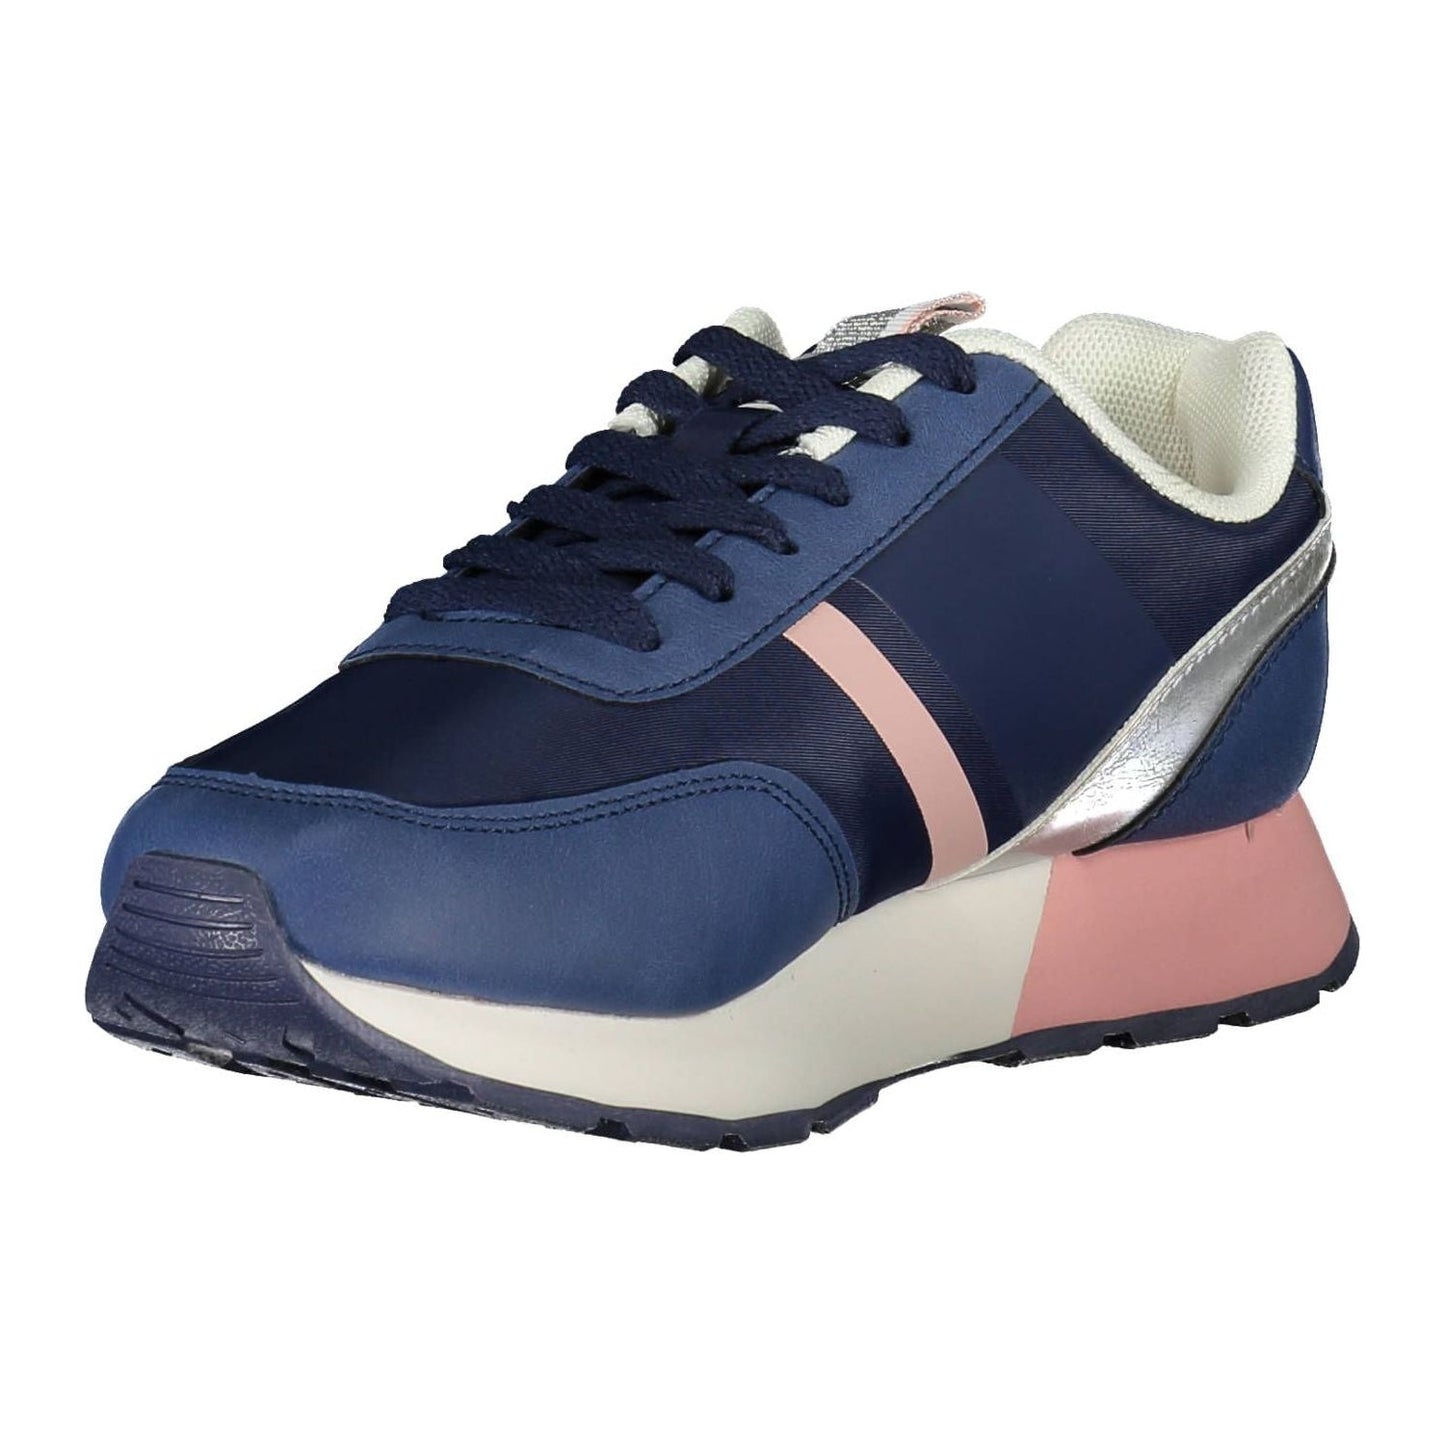 U.S. POLO ASSN. Chic Blue Lace-Up Sneakers with Logo Accent chic-blue-lace-up-sneakers-with-logo-accent